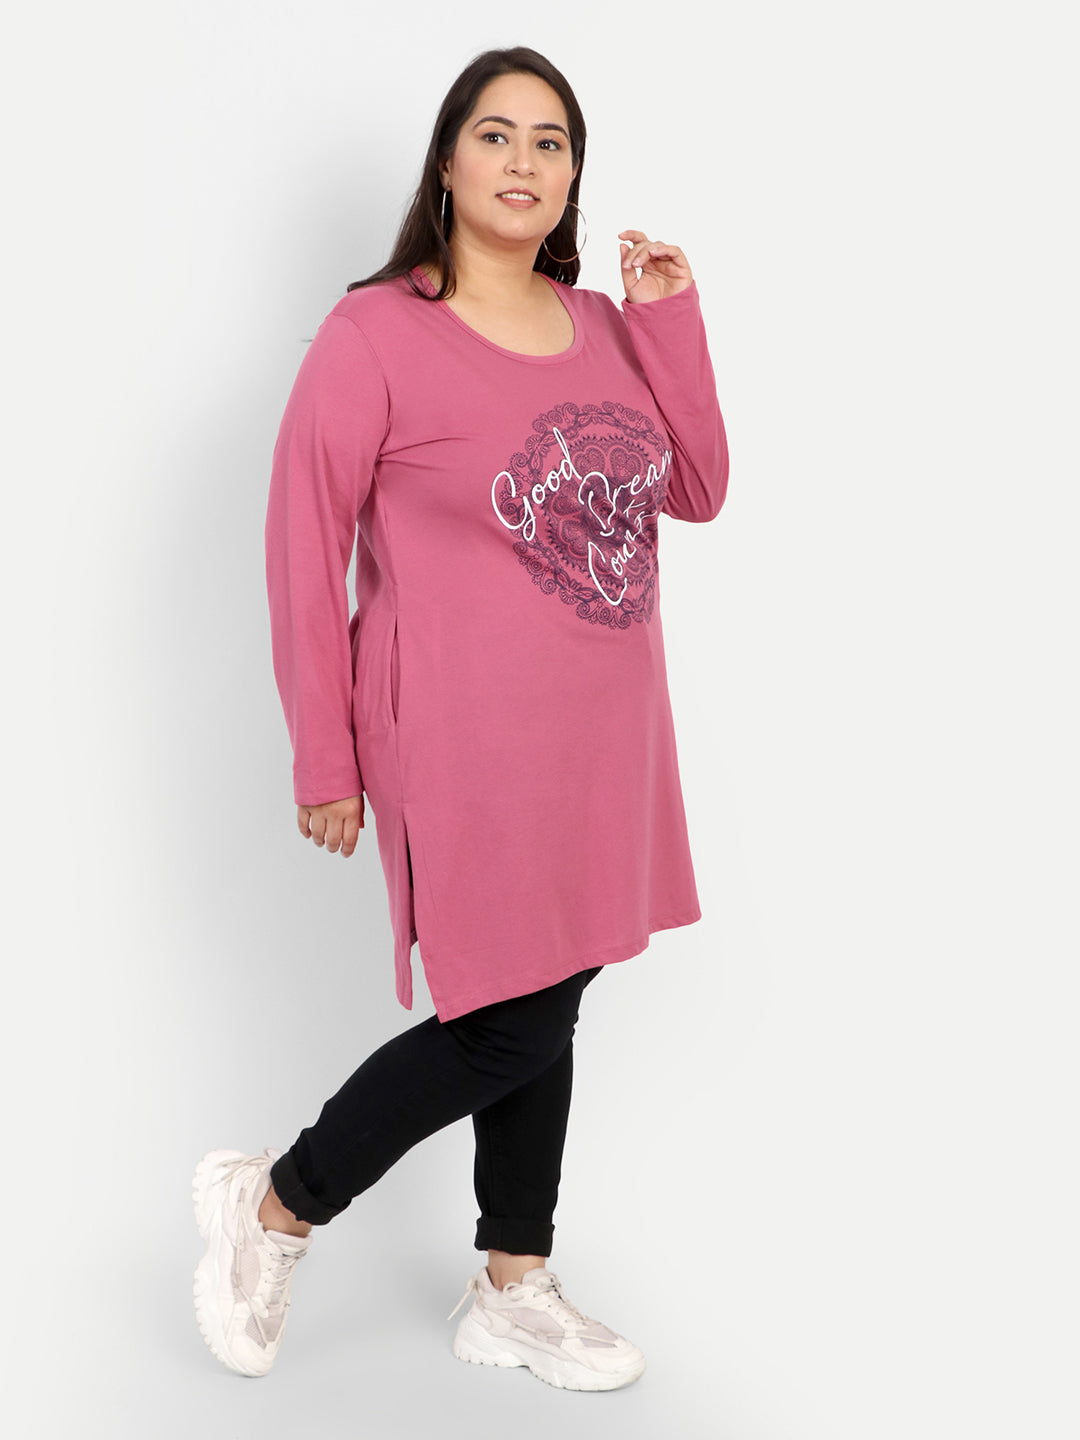 Plus Size Cotton Long Tops for Women Full Sleeves - Pack of 2 (Yellow & Rosy Pink)